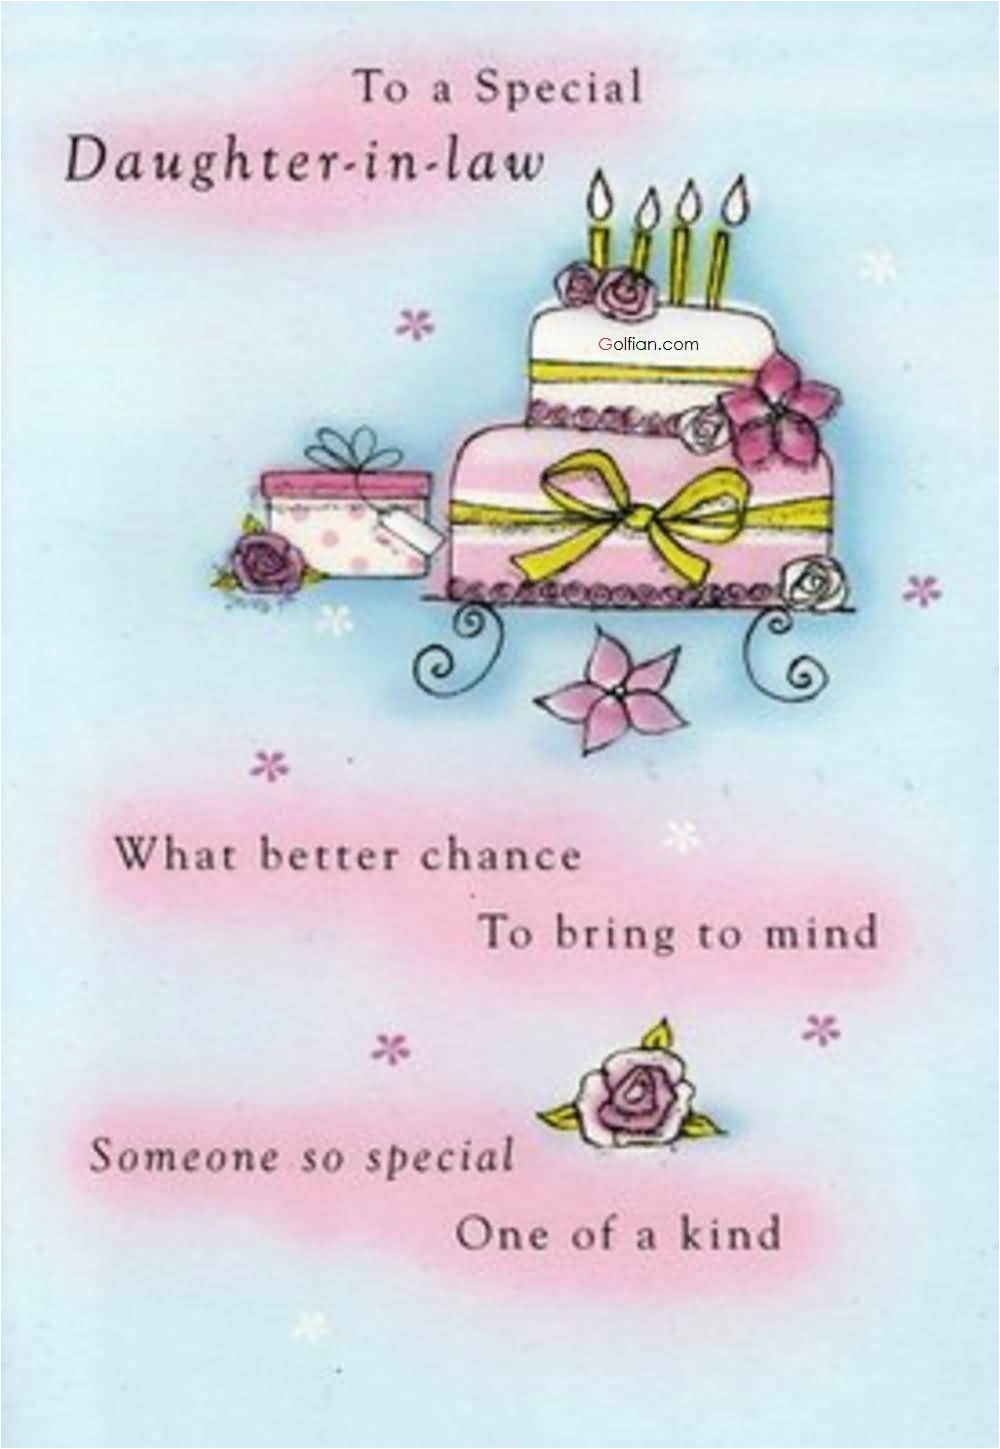 Daughter In Law Birthday Cards Verses 55 Beautiful Birthday Wishes For Daughter In Law Best Of Daughter In Law Birthday Cards Verses 